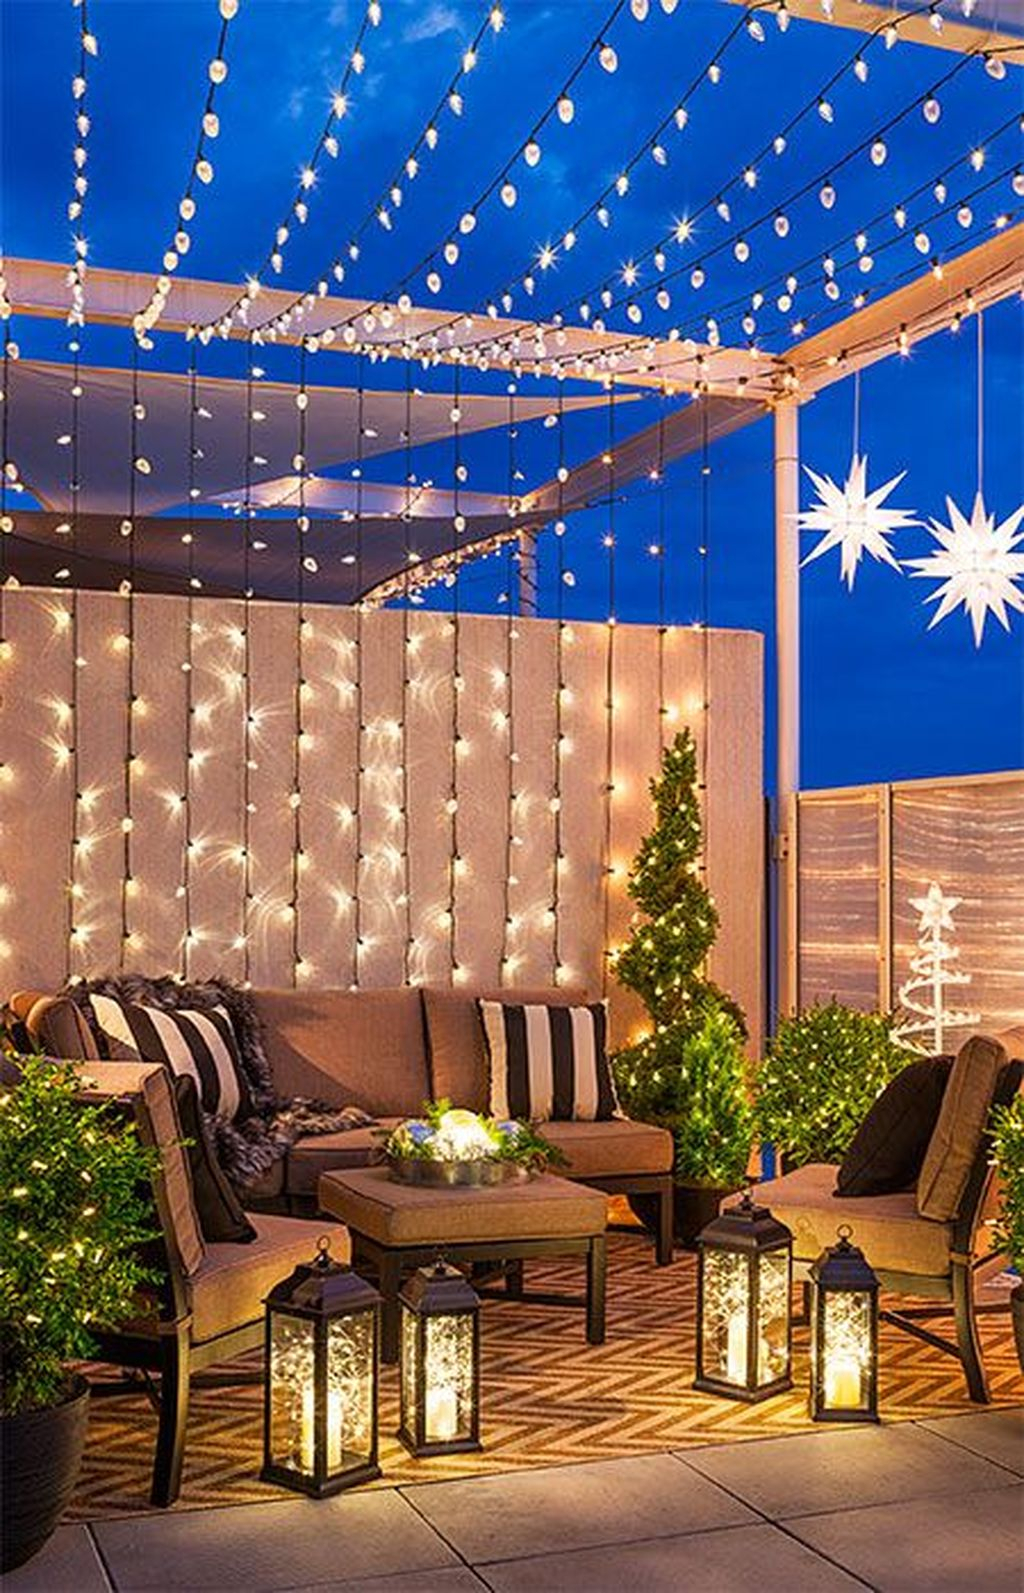 Creative Ideas To Decorate Your Outdoor Room15